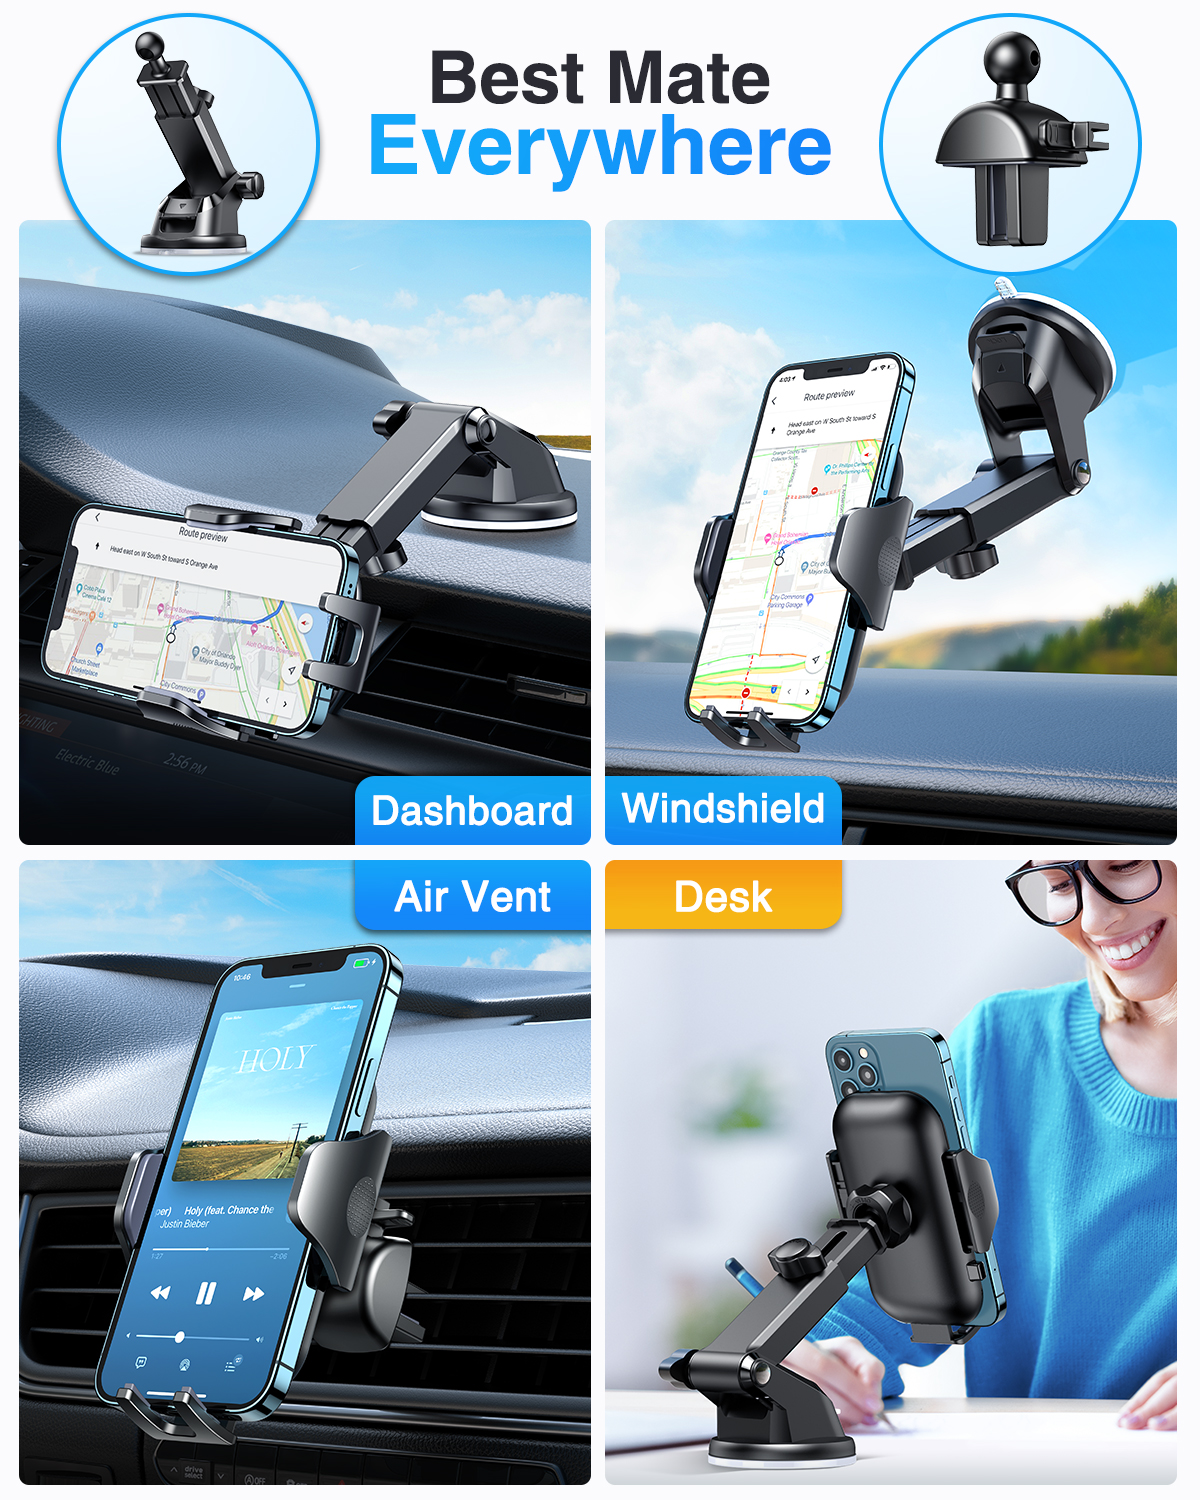 Washable Strong Sticky Suction Pad One Button Release Car Cradle Dashboard Air Vent Cell Phone Holder for Car Compatible iPhone 11 Pro Xs XR X 8 7 Galaxy S10 S9 S8 Etc VANMASS Car Phone Mount